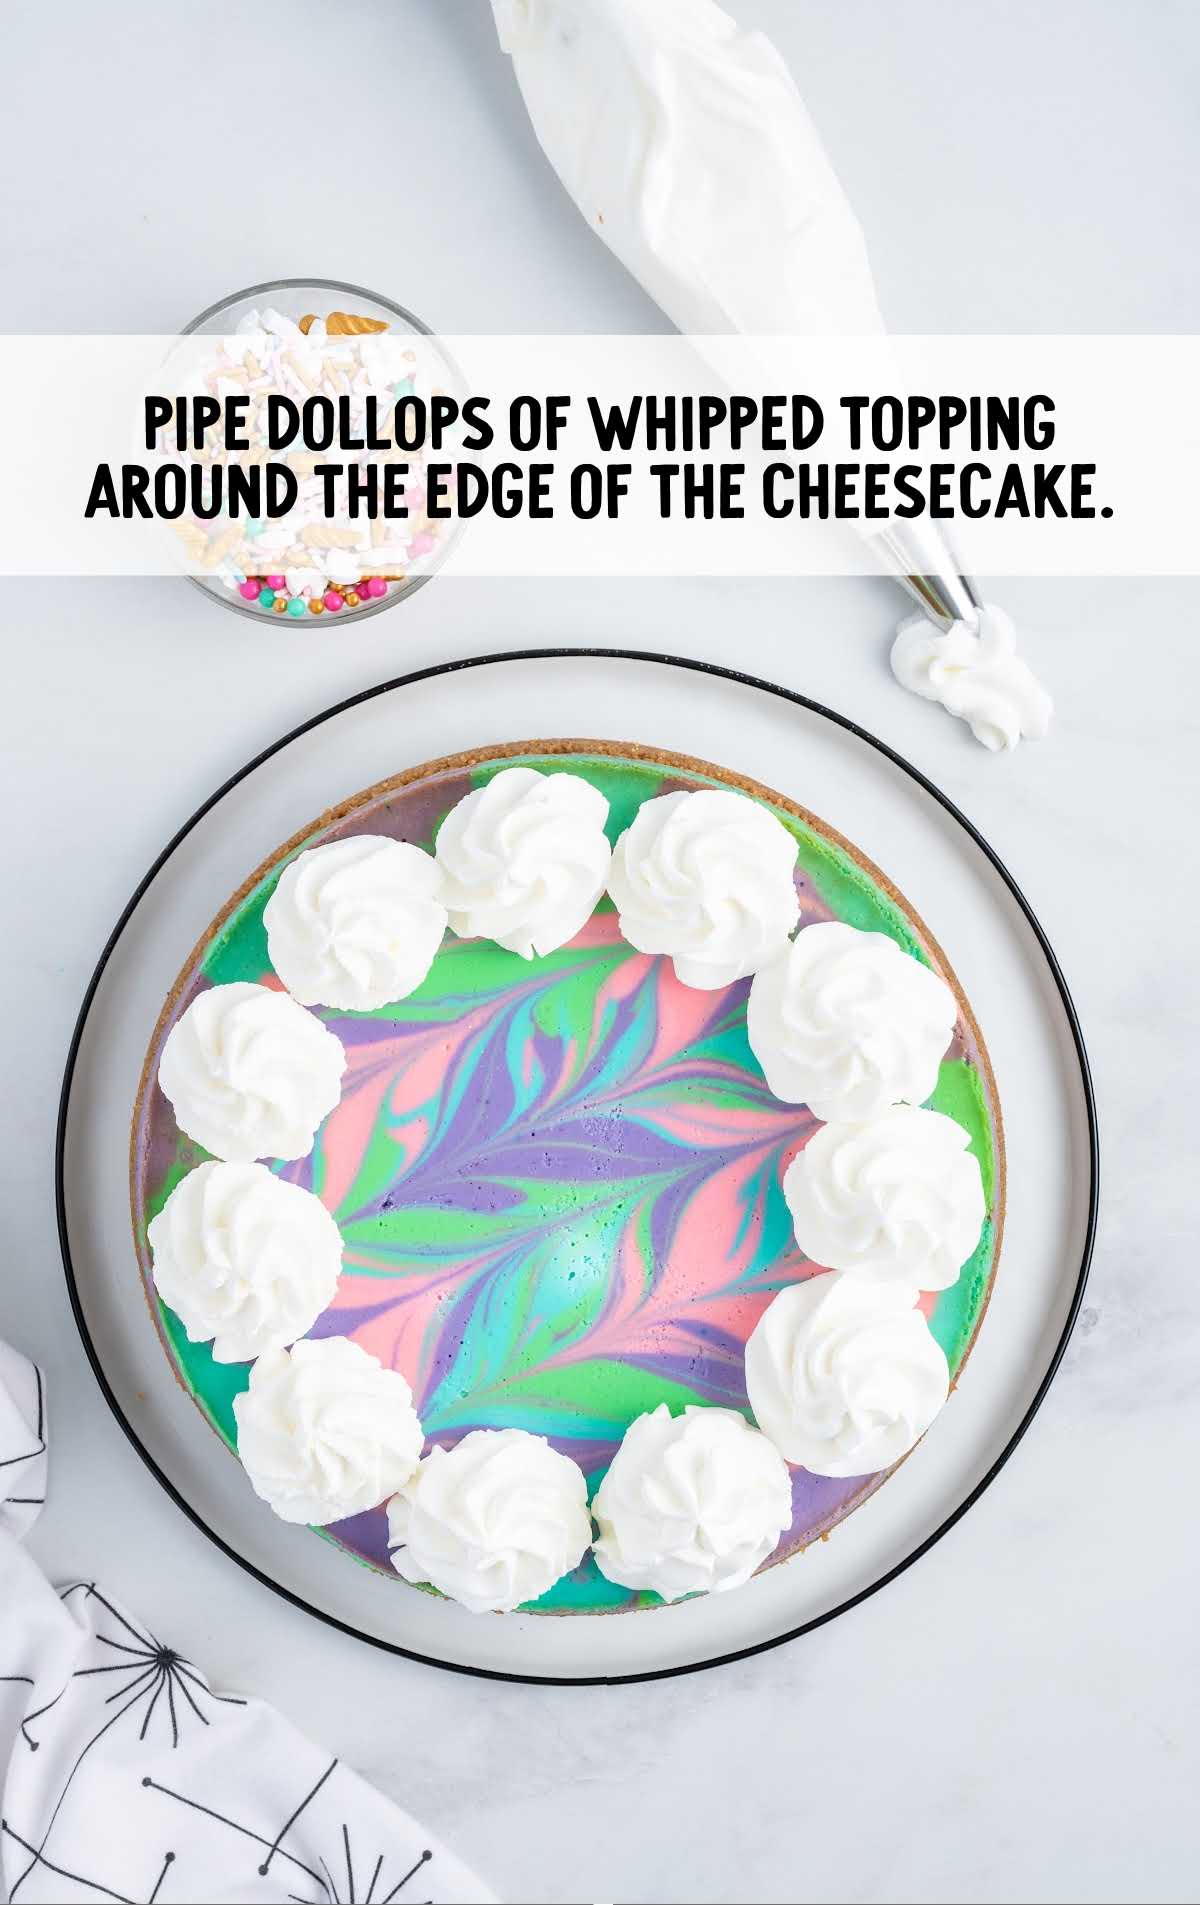 whipped topping dollops around the edges of the cheesecake